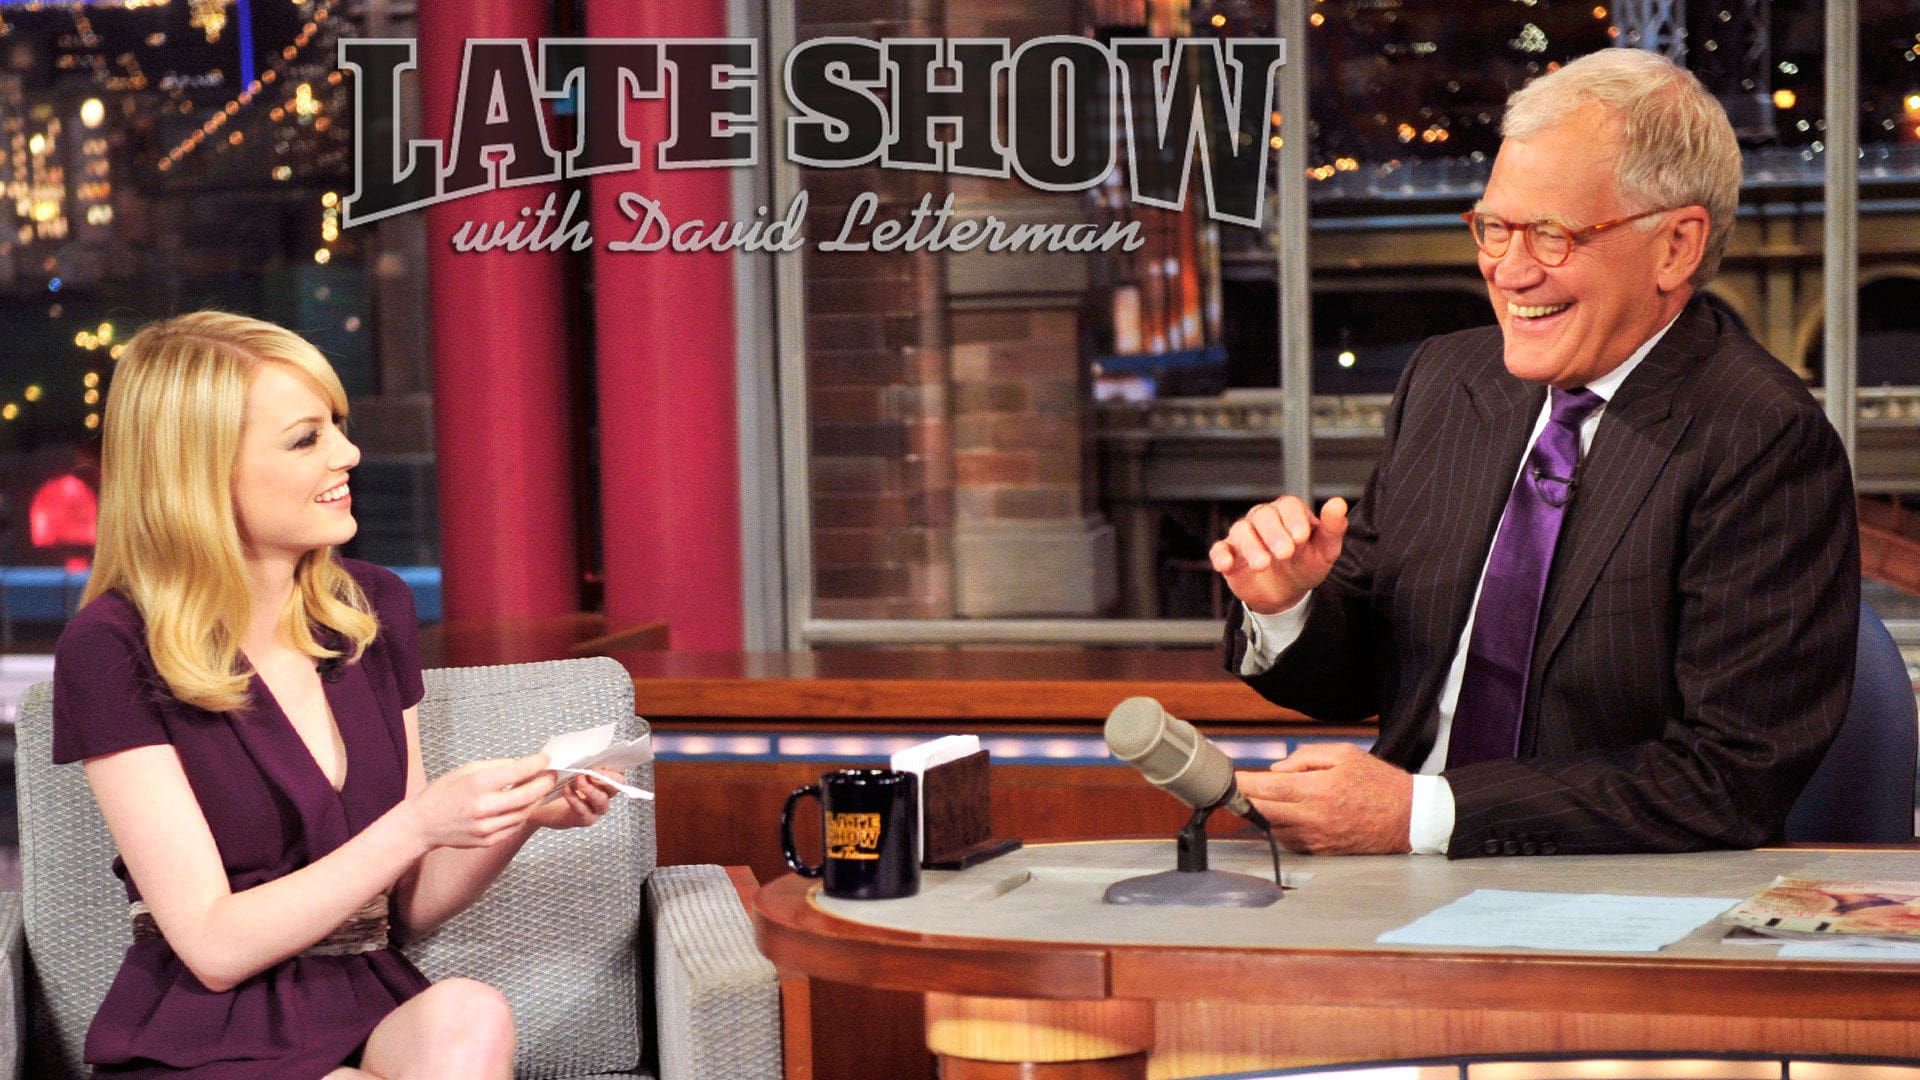 Late Show with David Letterman - Season 22 Episode 47